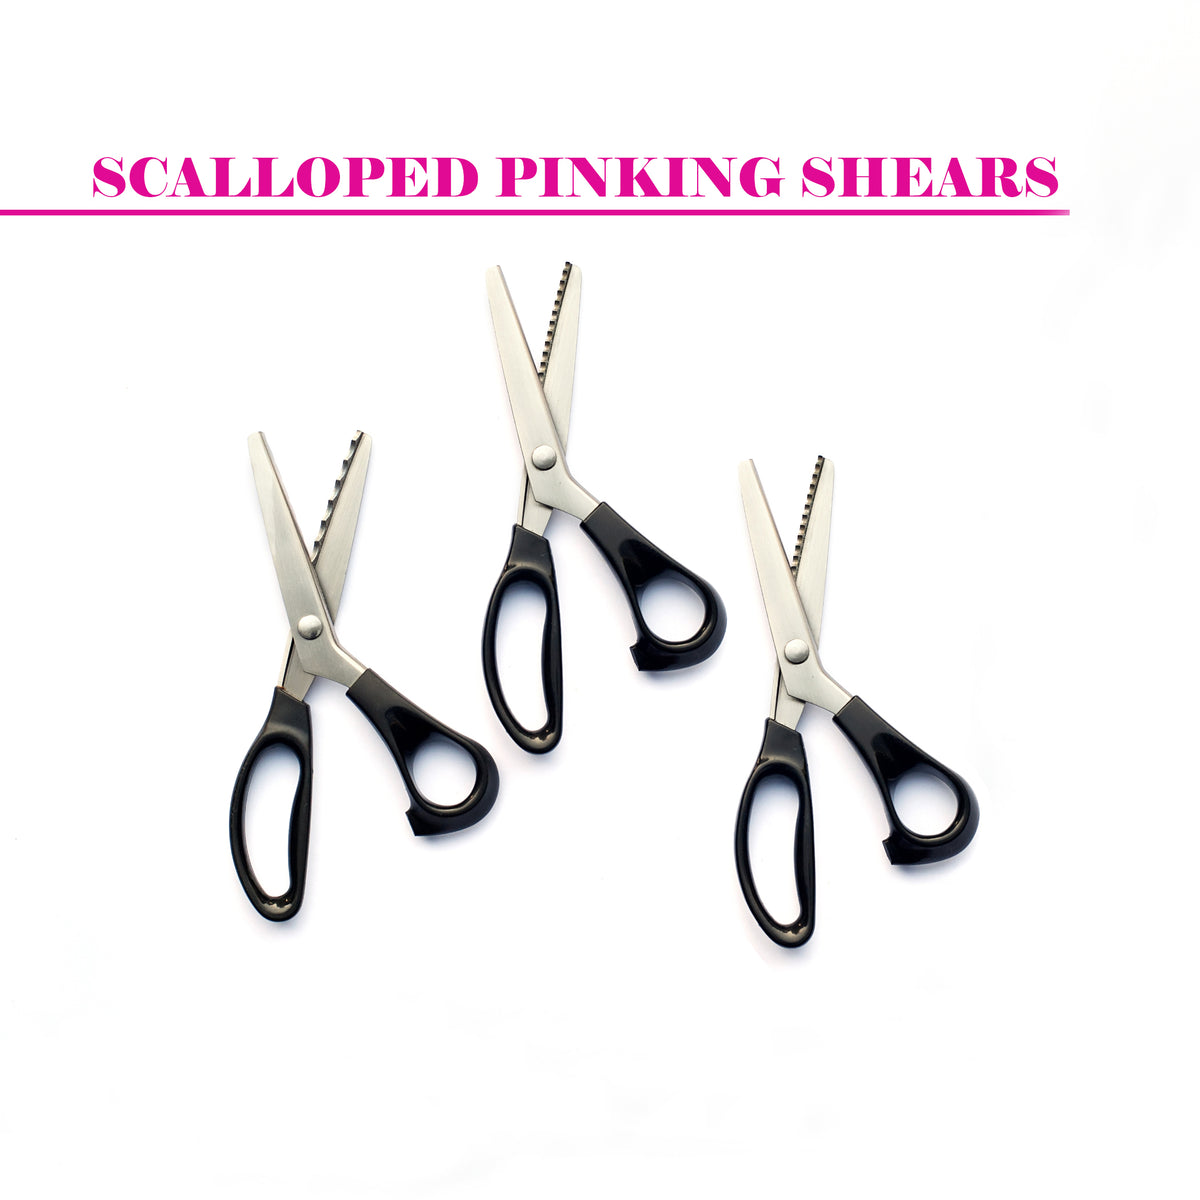 Scissors - 3mm or 5mm or 10mm Scalloped Shears